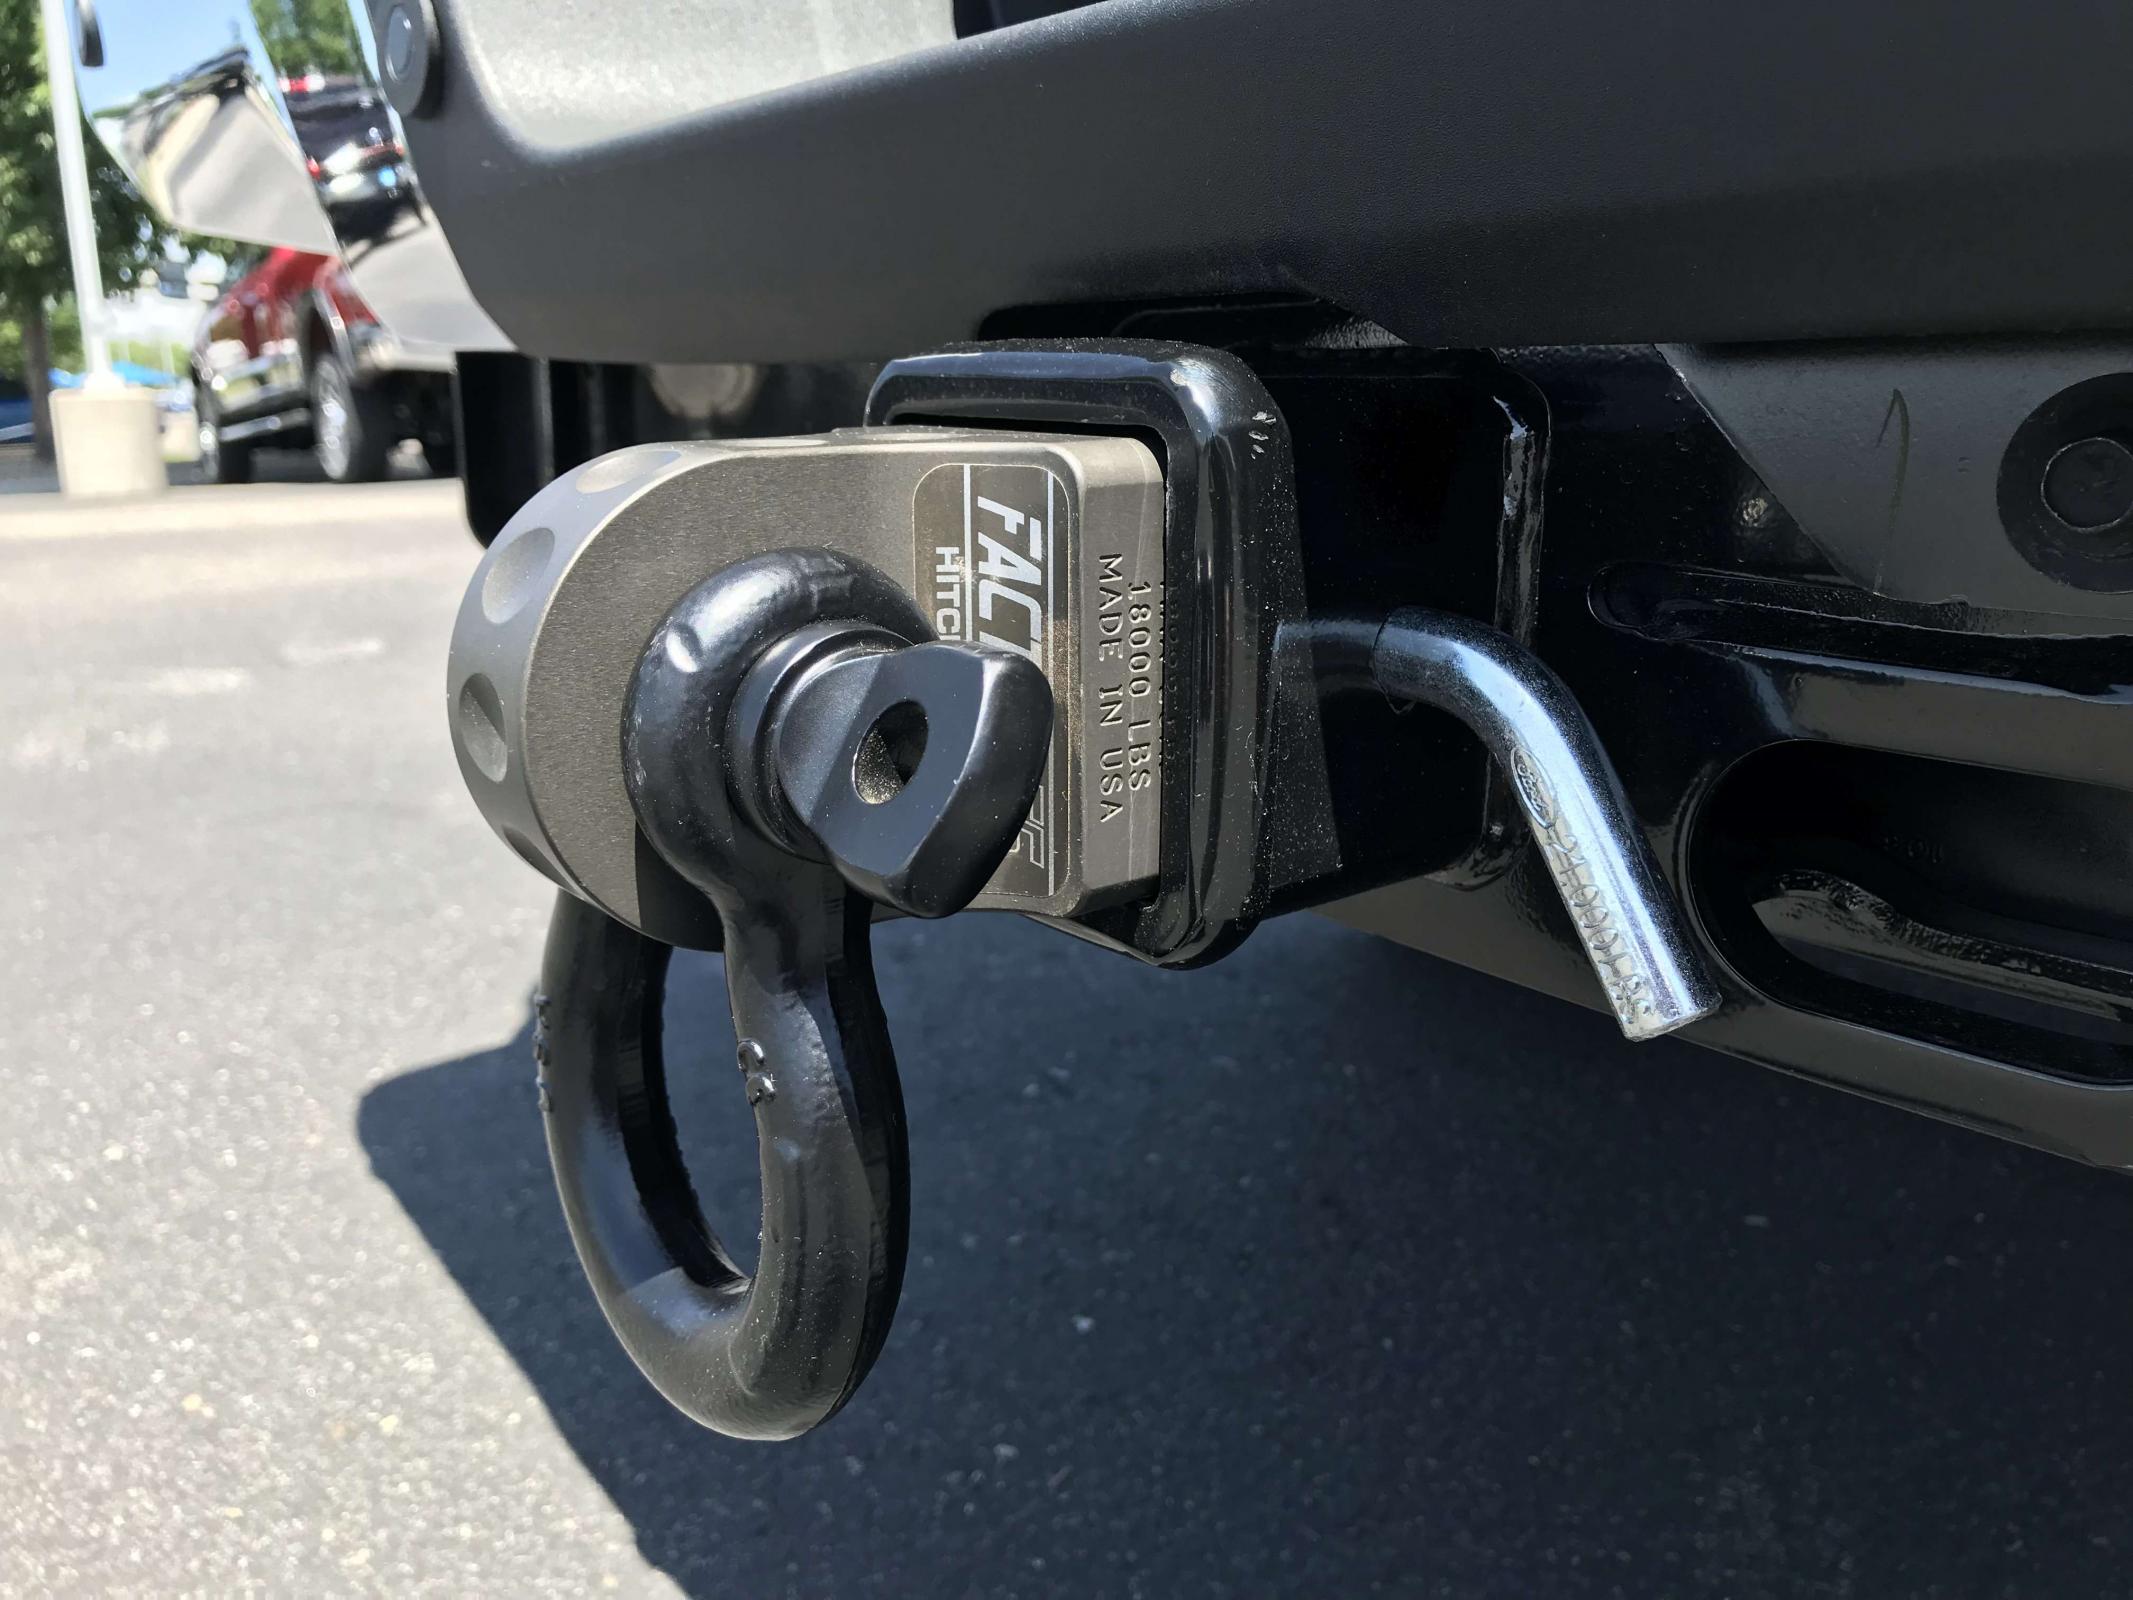 Factor 55 HitchLink 3.0 Reciever Shackle Mount 3 Inch Receivers Anodized Gray Factor 55